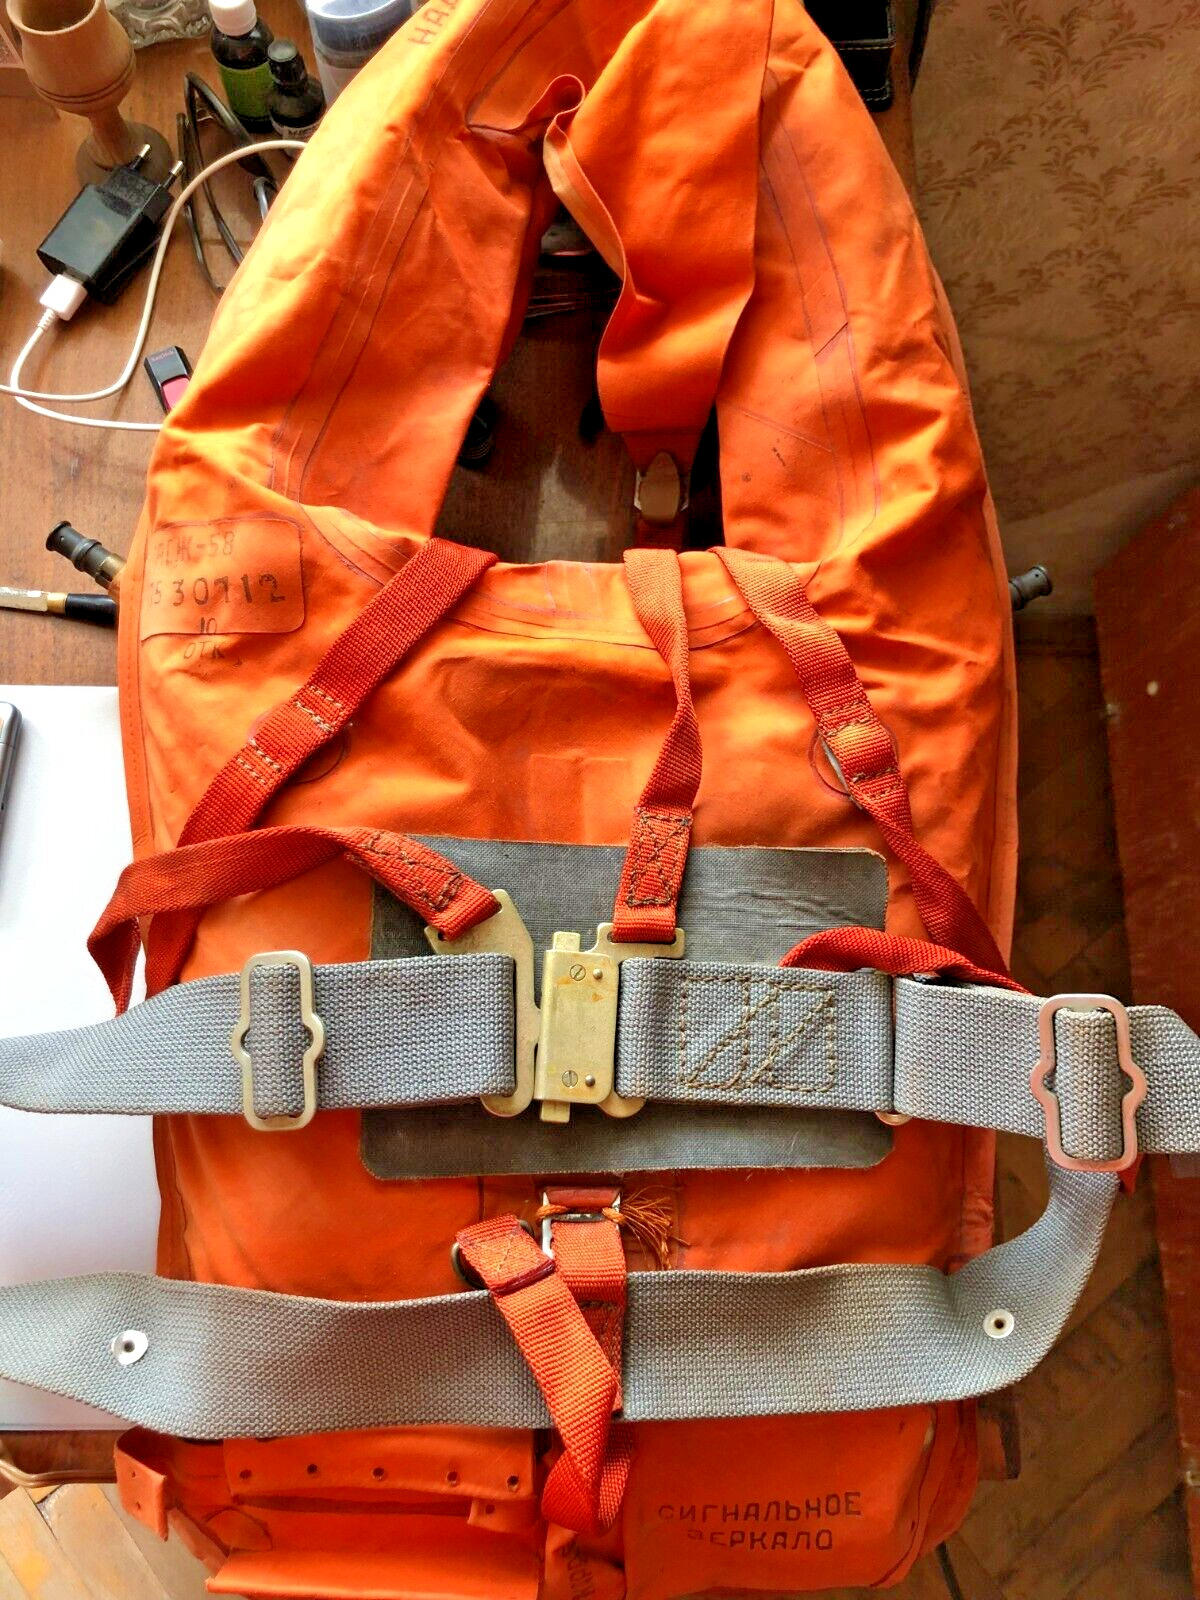 Vintage Ussr aviation life jacket 1975 year of manufacture